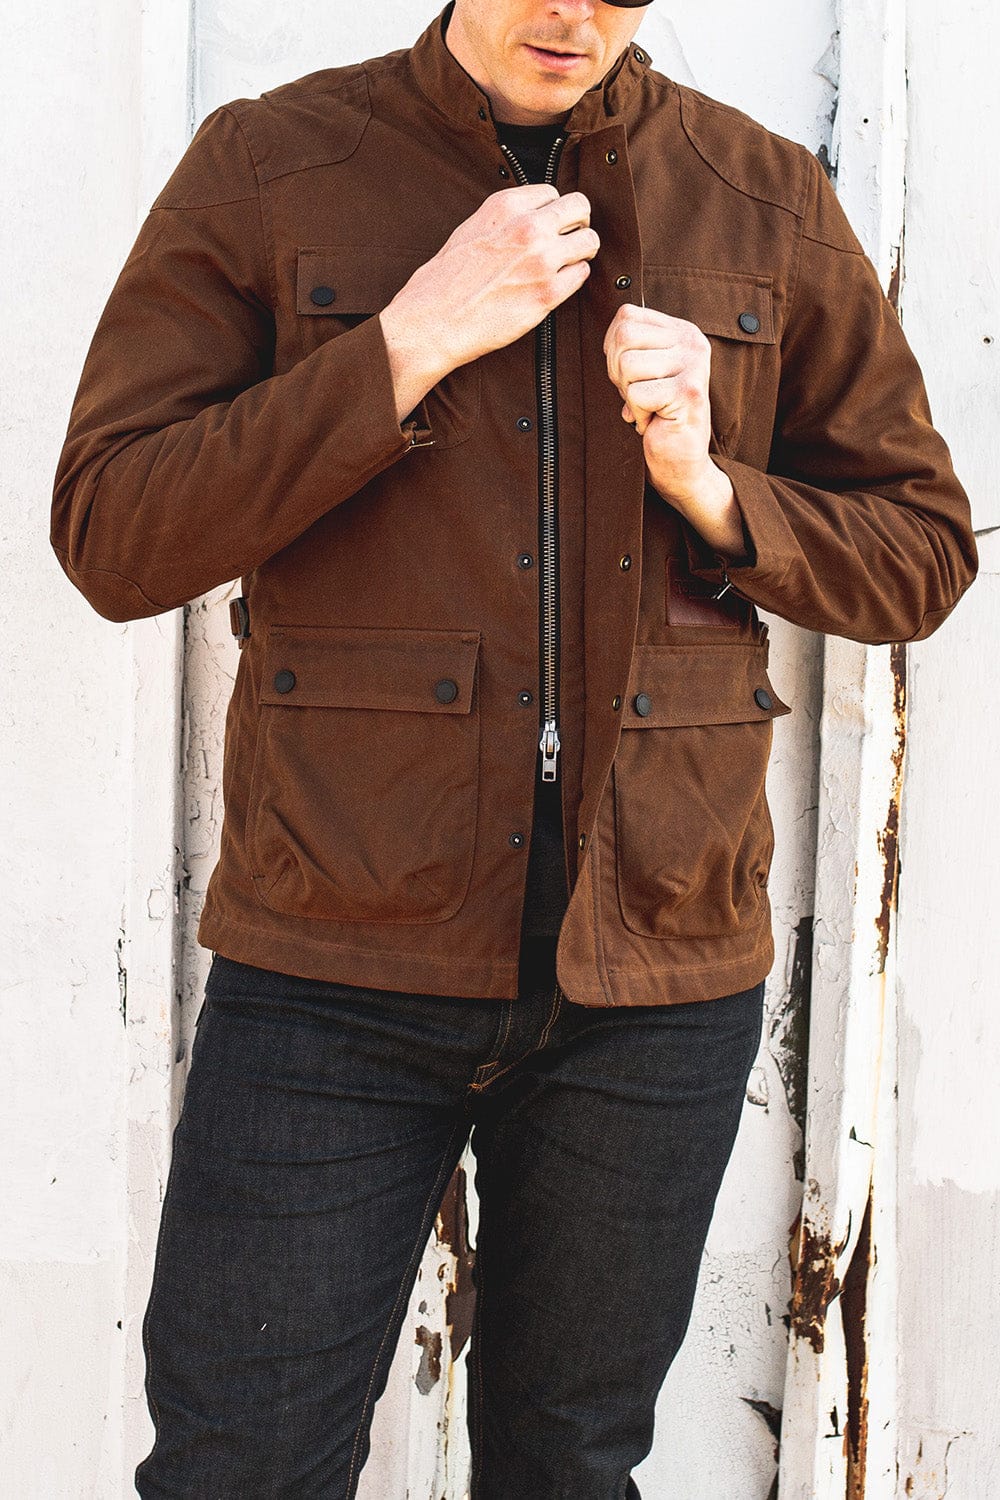 The McCoy Waxed D3O® Shoulder Tobacco Pockets Elbow Motorwear Back, and Jacket - - for Canvas Protective Brown. Armor